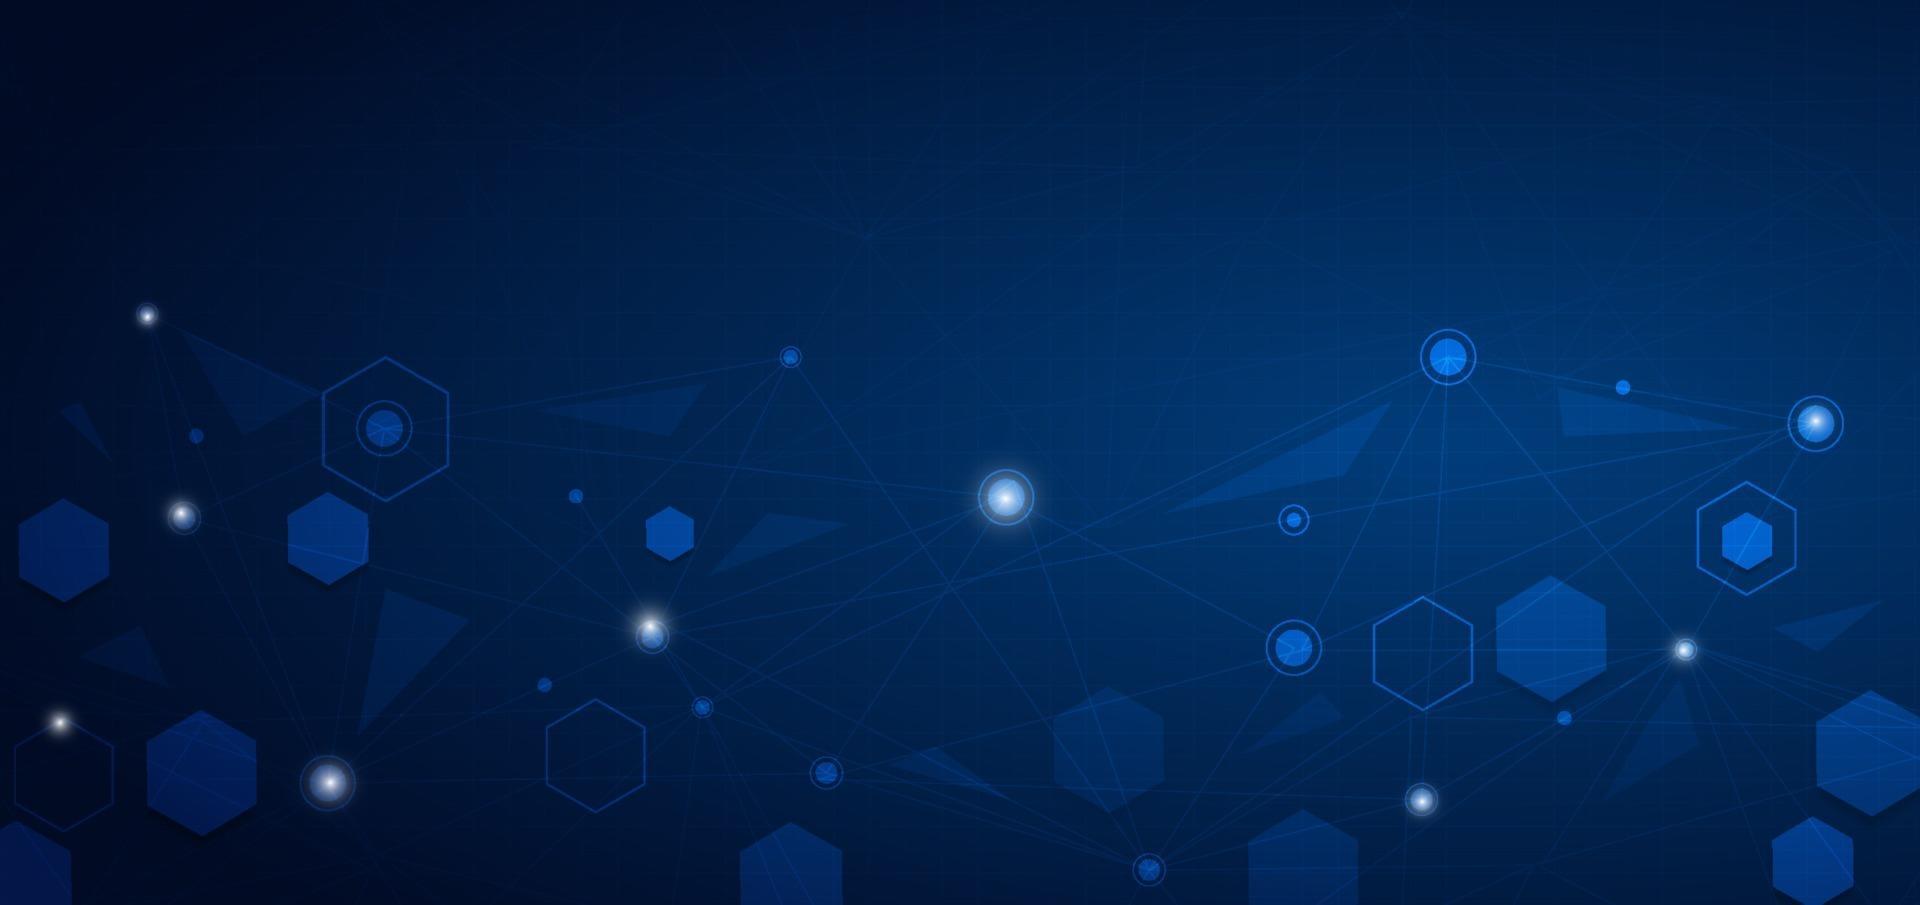 Abstract blue hexagon pattern background. Medical and science, technology connection concept. vector